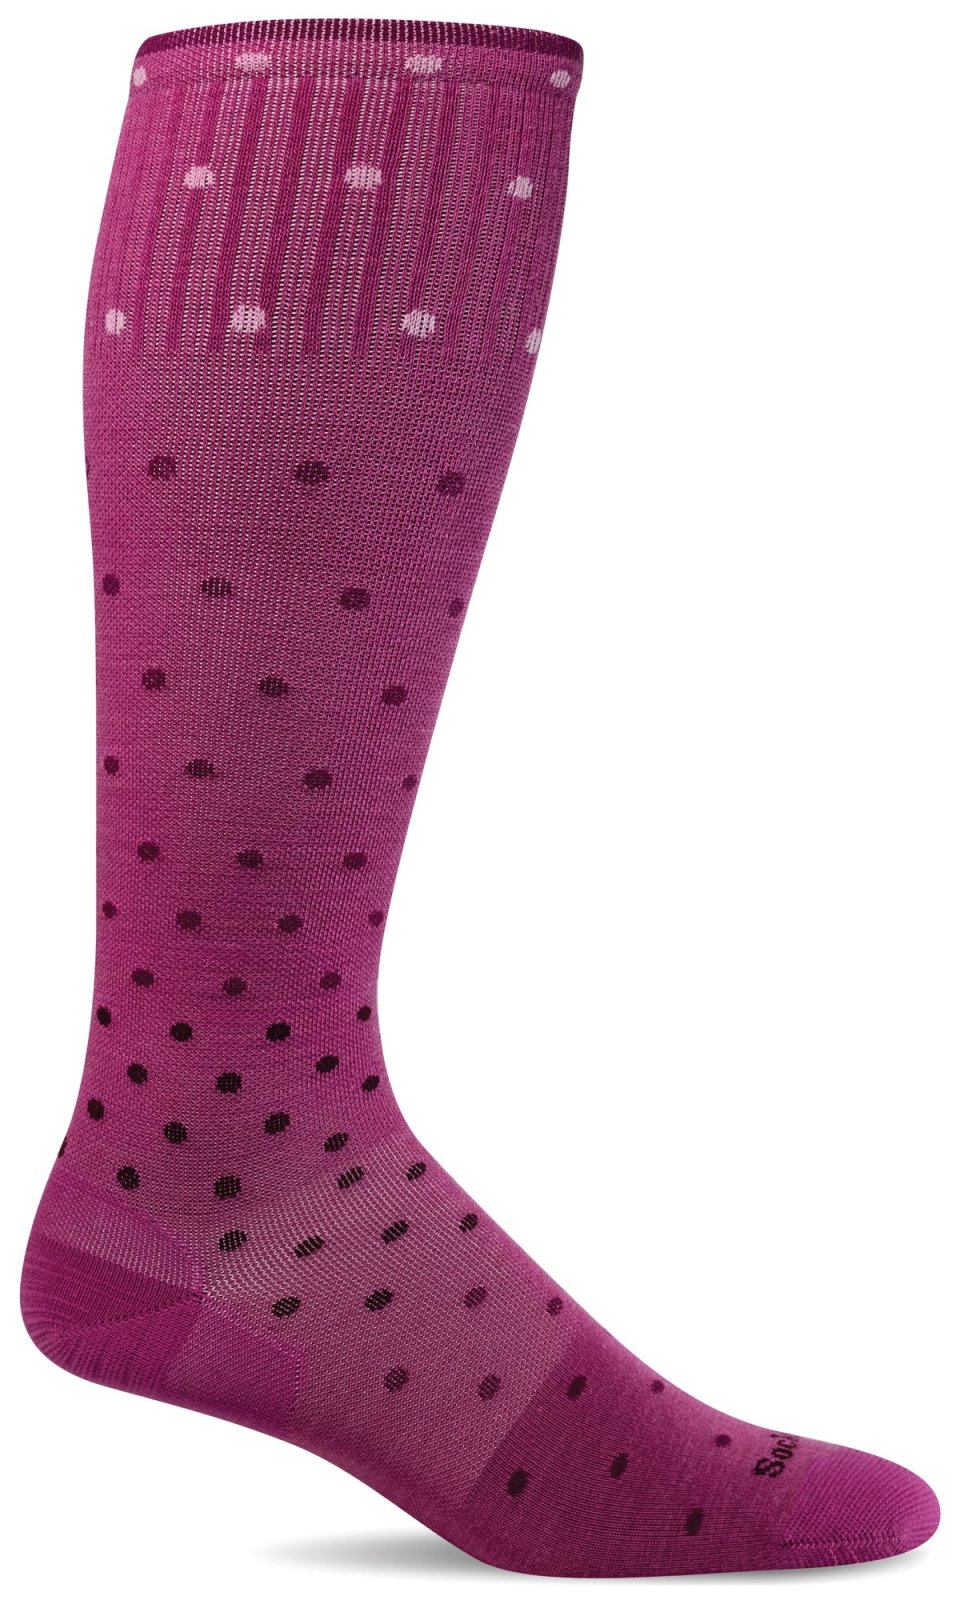 Women's On the Spot | Moderate Graduated Compression Socks - Merino Wool Lifestyle Compression - Sockwell